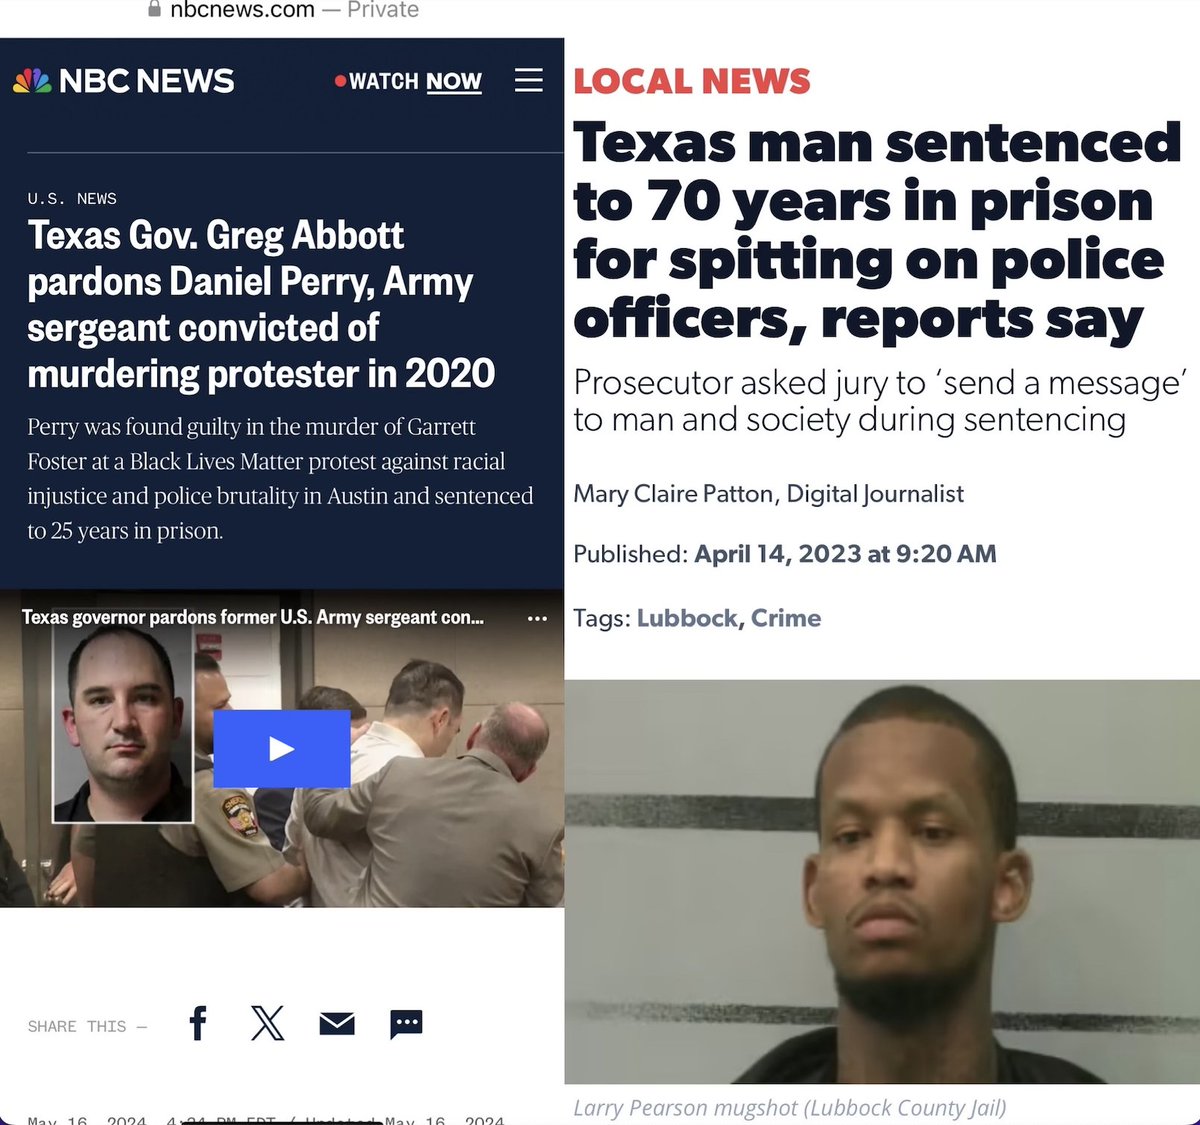 Texas Gov Abbot pardoned a white man & convicted murderer for killing a BLM protestor Meanwhile Texas sentenced a Black man to 70 years in prison for spitting on police to “make an example out of him.”😳 Systemic white supremacy is thriving in the GOP. Horrific.